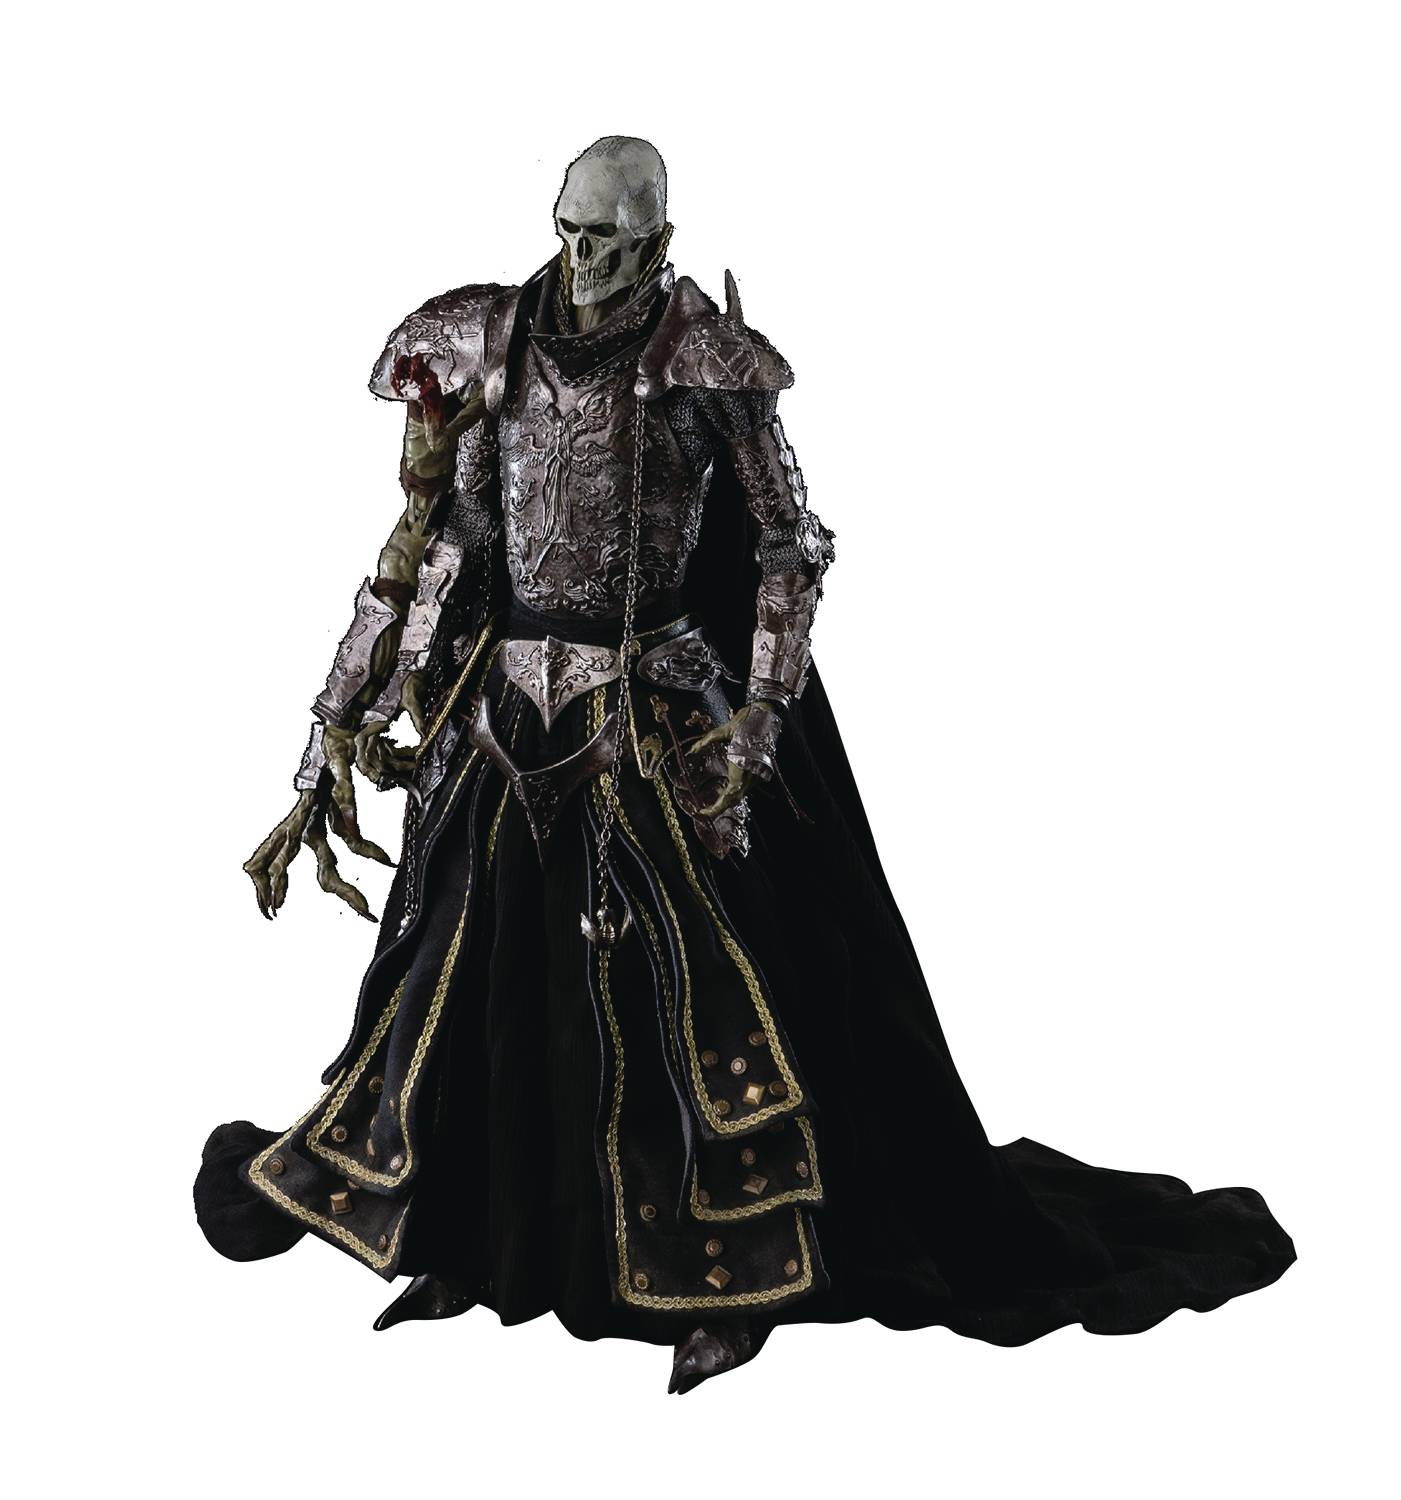 COURT OF THE DEAD DEMITHYLE 1/6 SCALE FIG RETAIL EDITION (NE